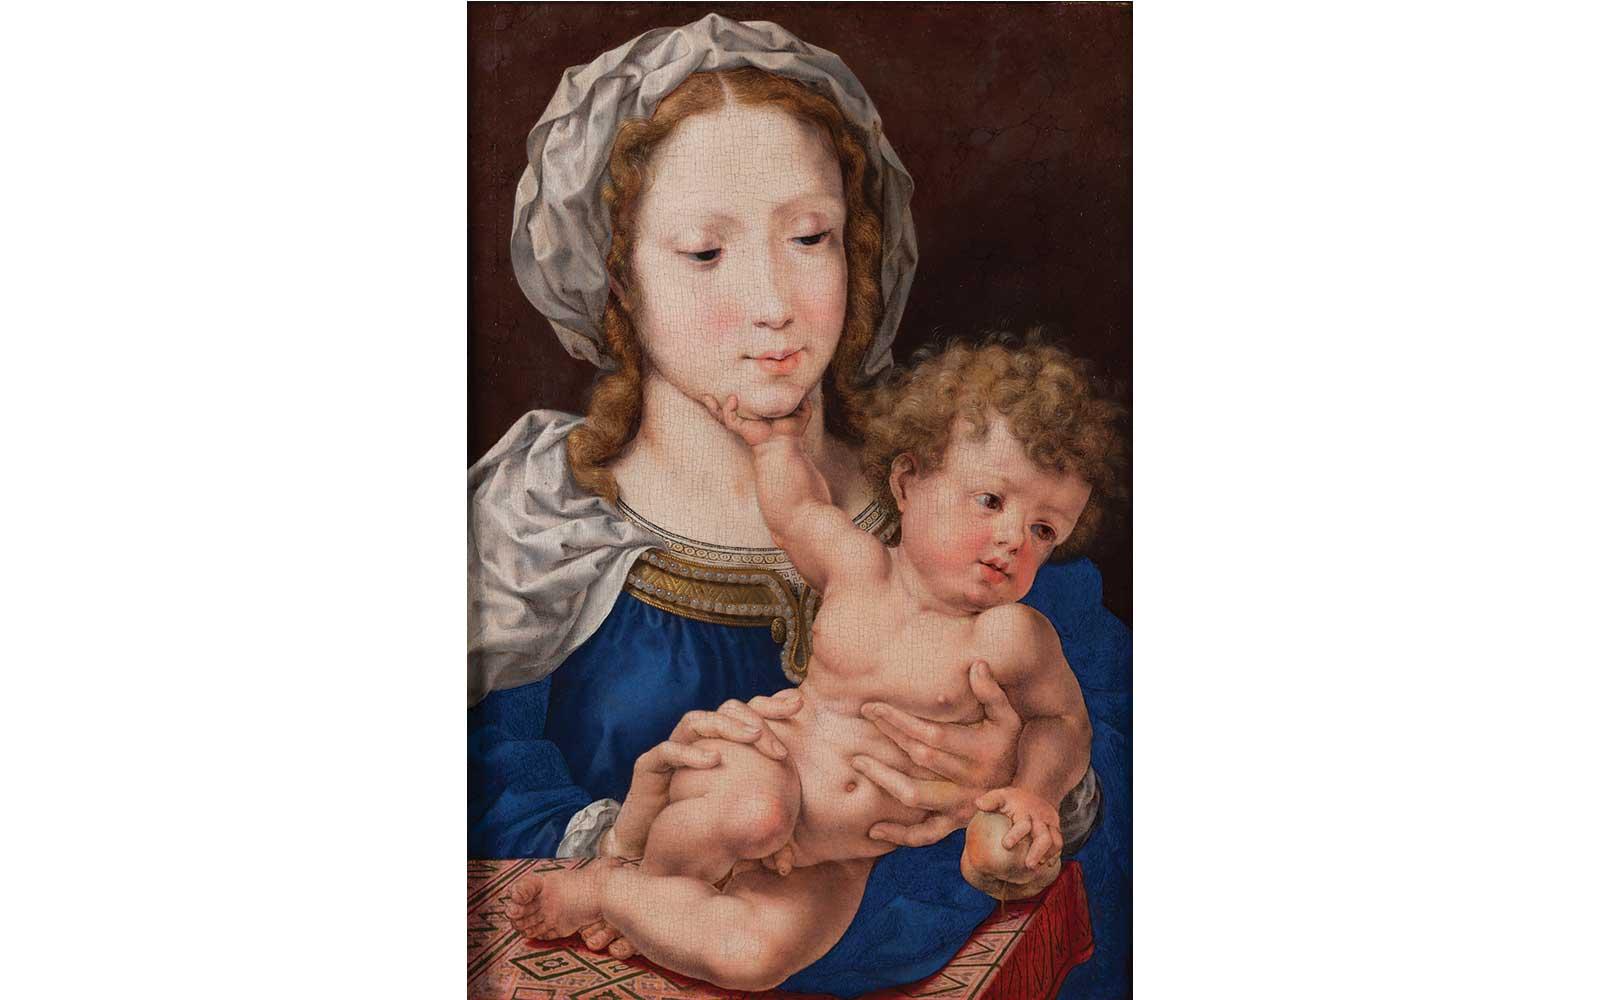 Jan Gossaert, The Virgin and Child, about 1520. 